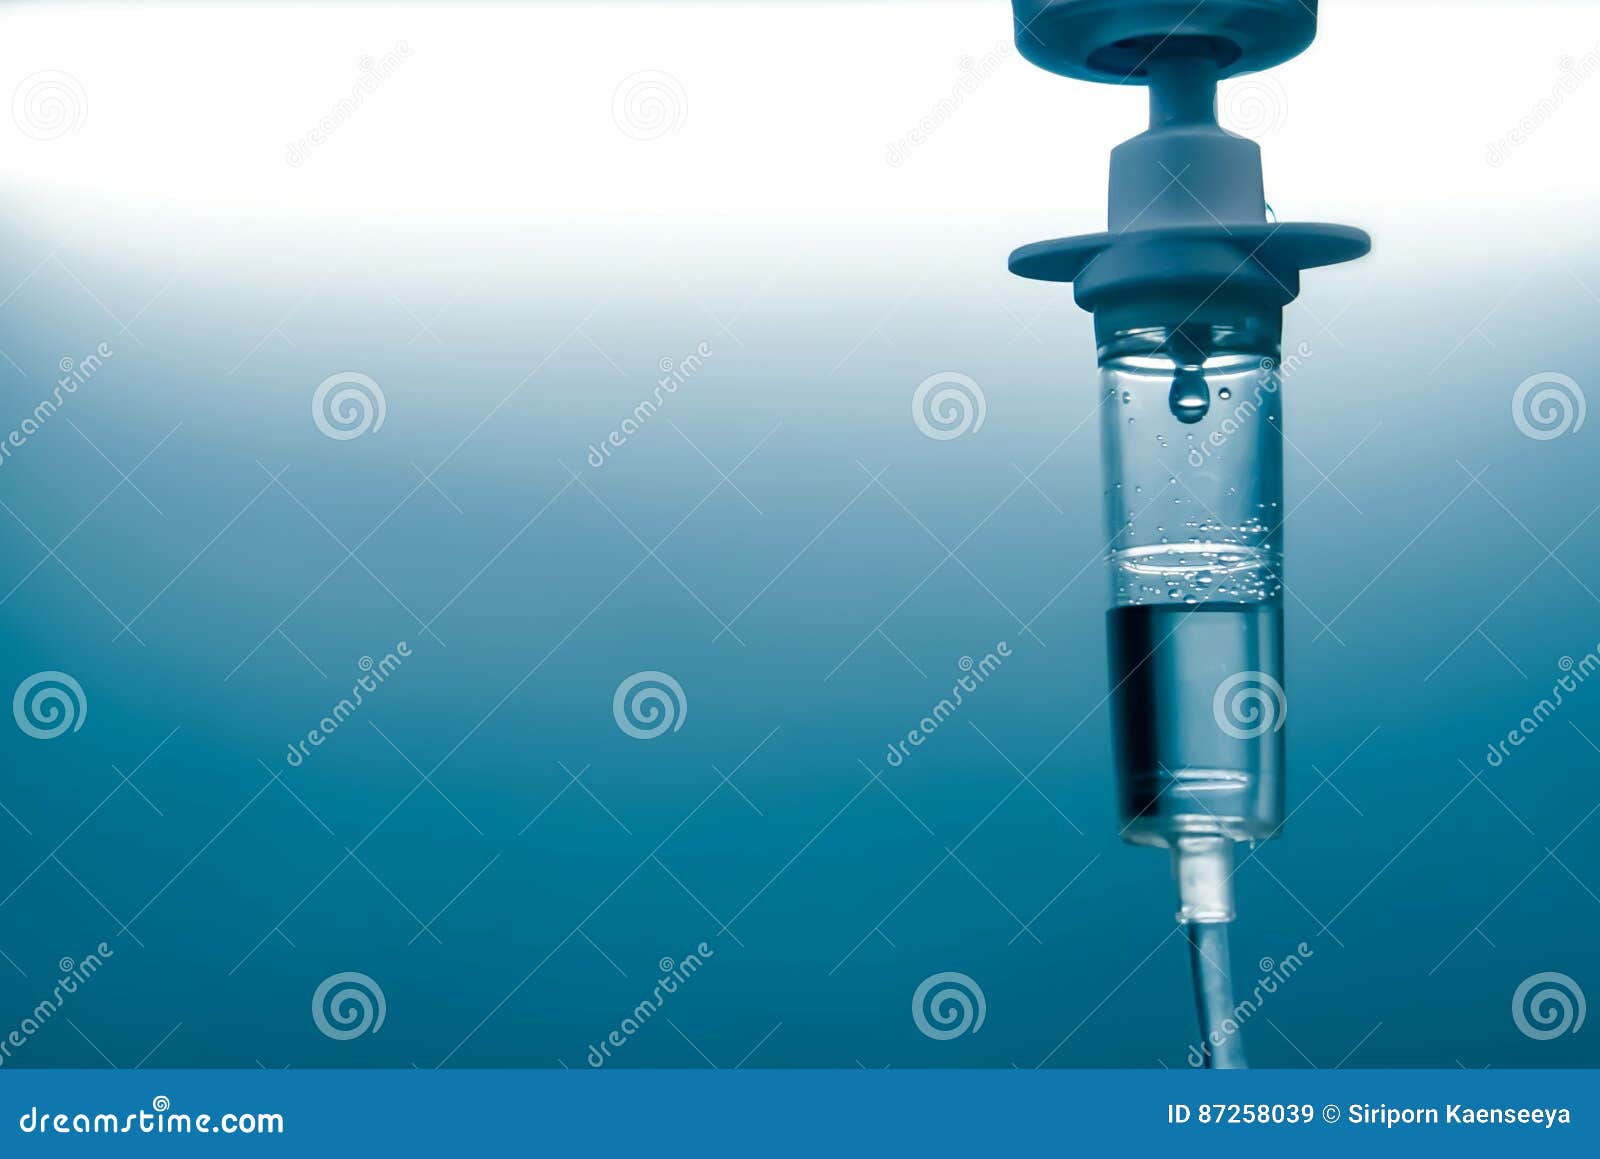 intravenous drip in a hospital room